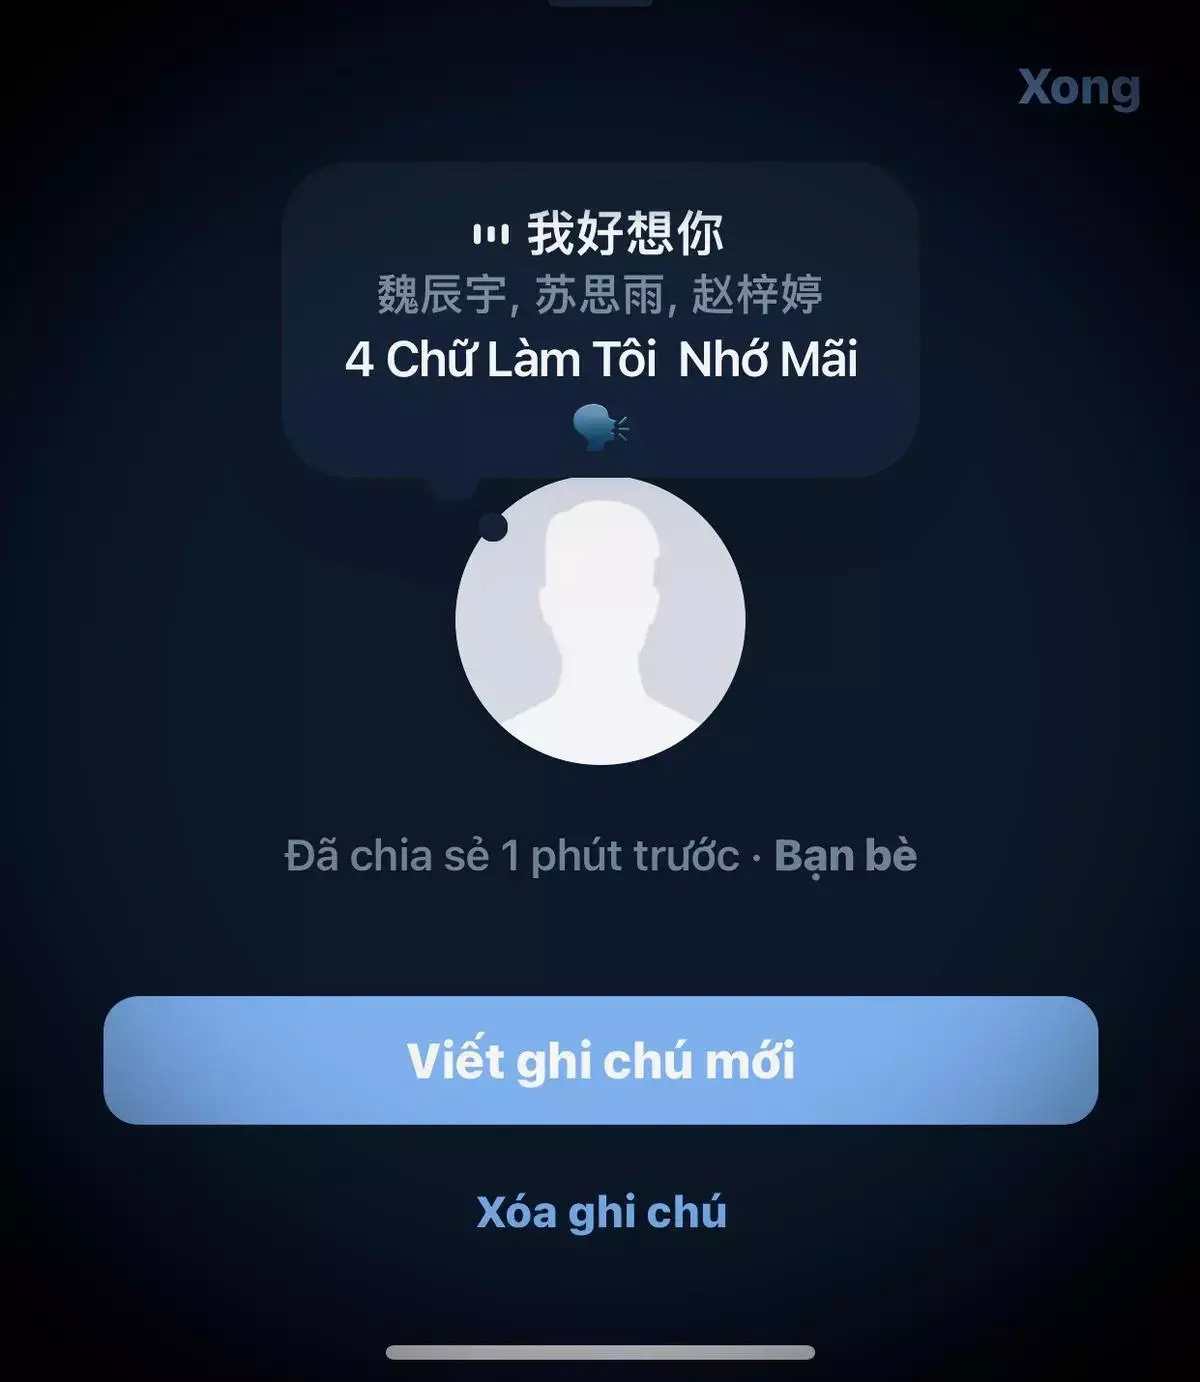 #ngdhuyy09 #fypシ #xuhuong #foryou #fyppppppppppppppppppppppp #viral #buon #tamtrang 